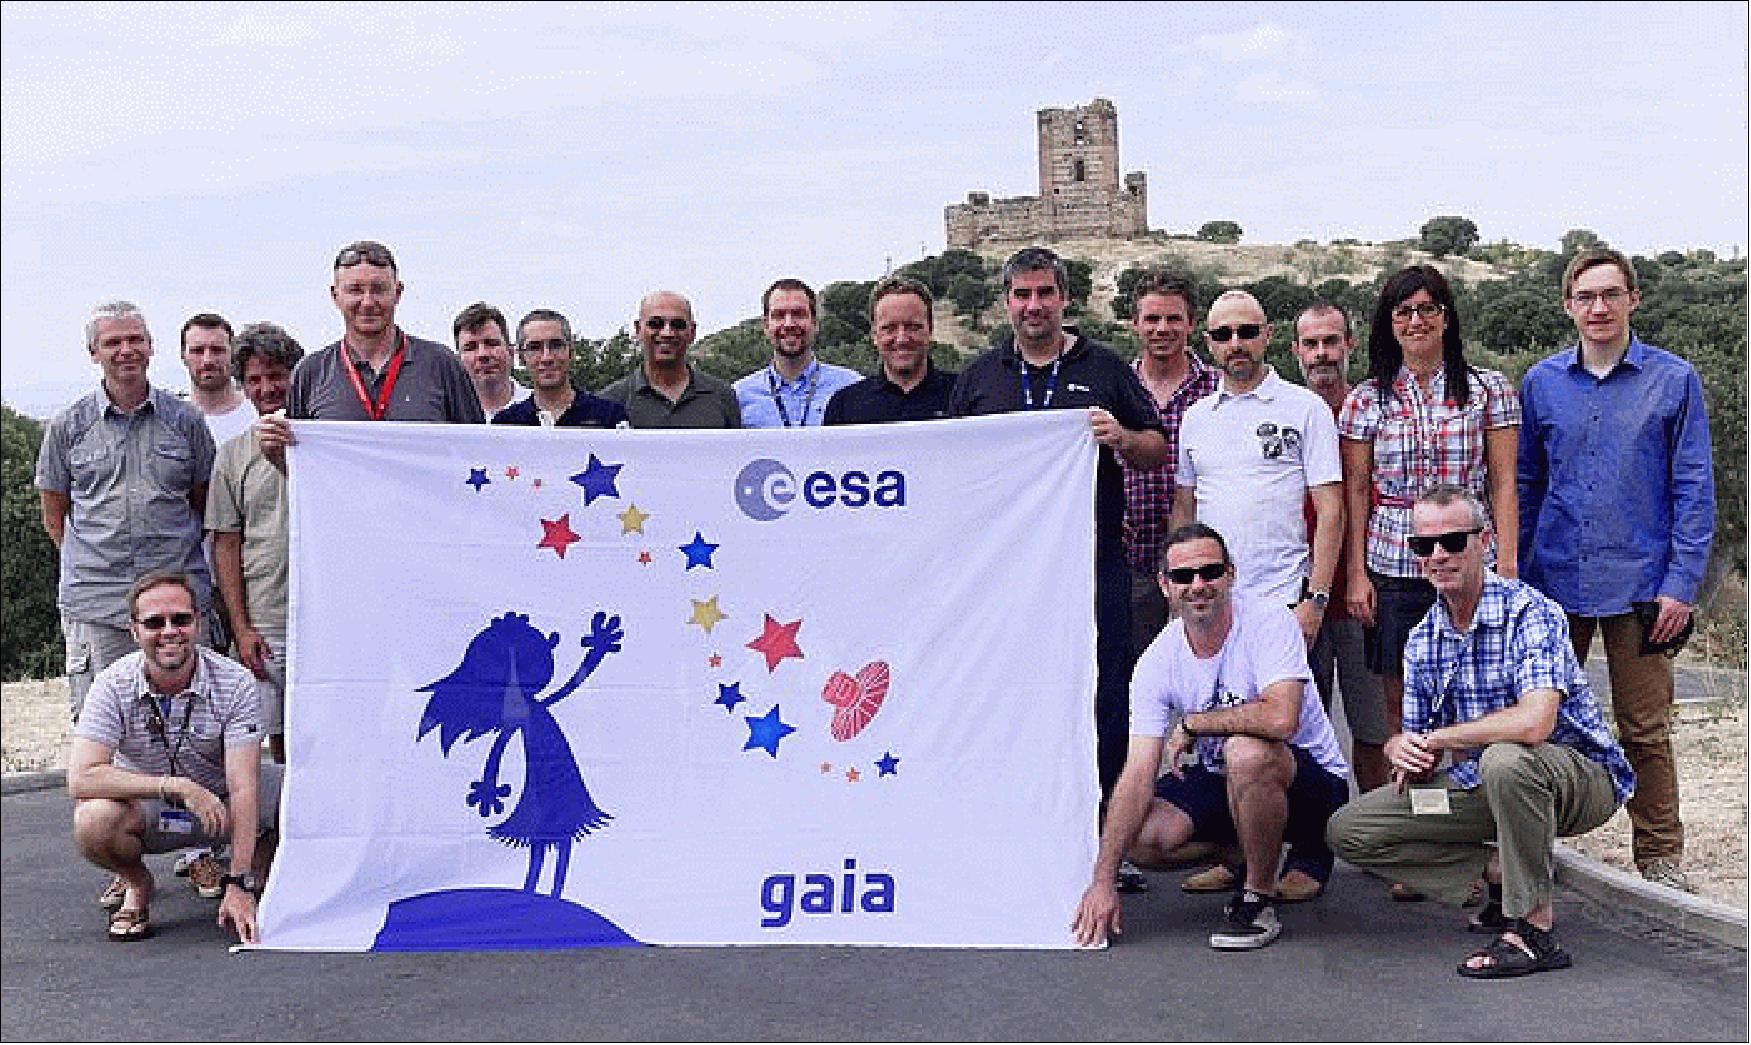 Figure 93: Handover of the Gaia flag by ESA Teams to mark the start of science operations (image credit: ESA)